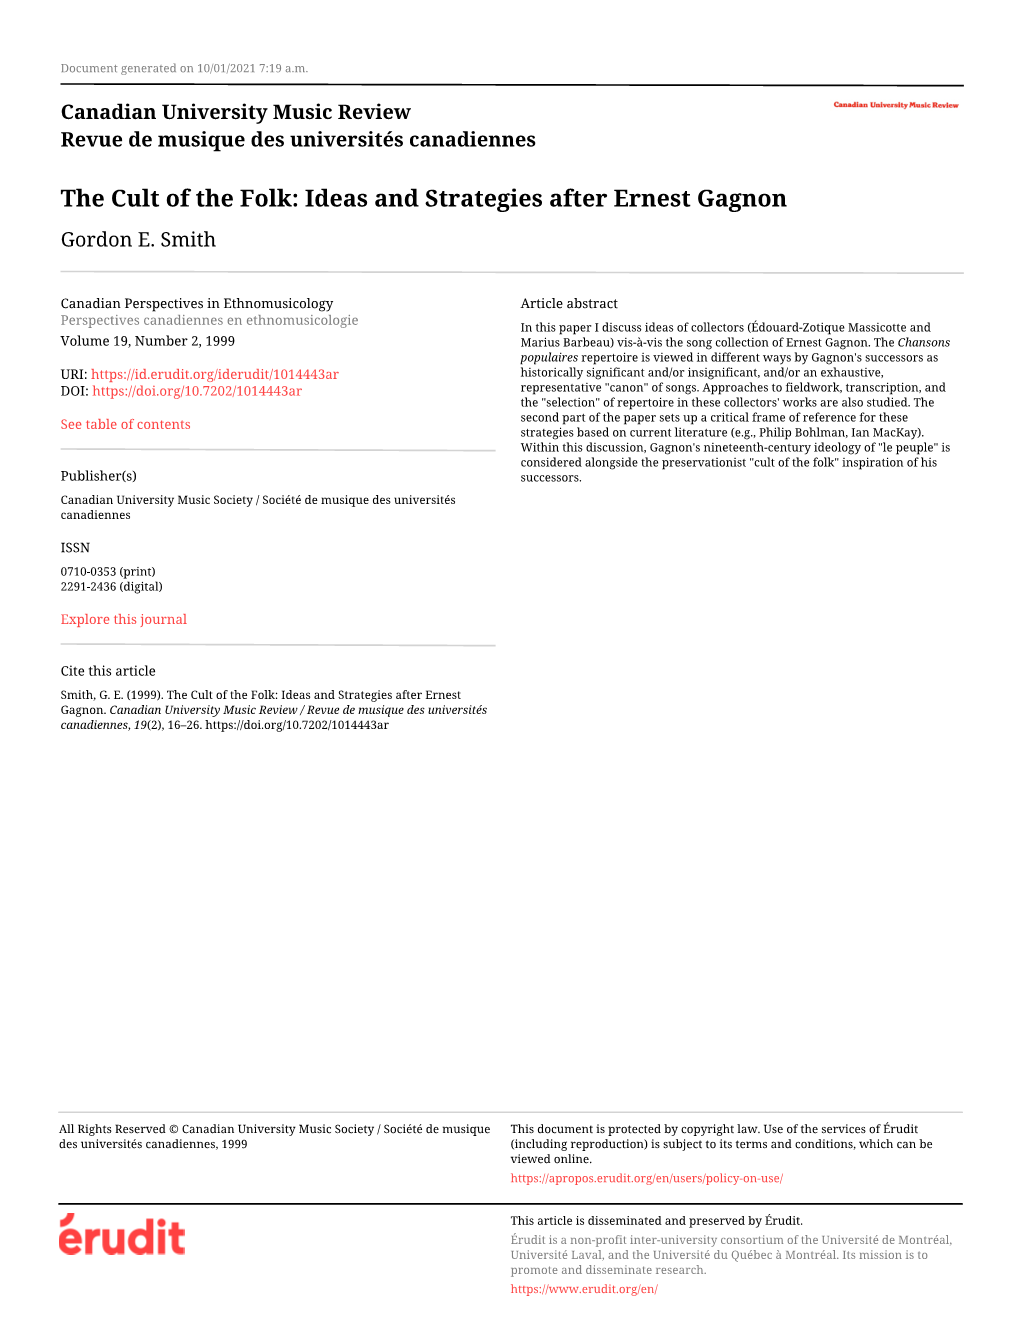 The Cult of the Folk: Ideas and Strategies After Ernest Gagnon Gordon E